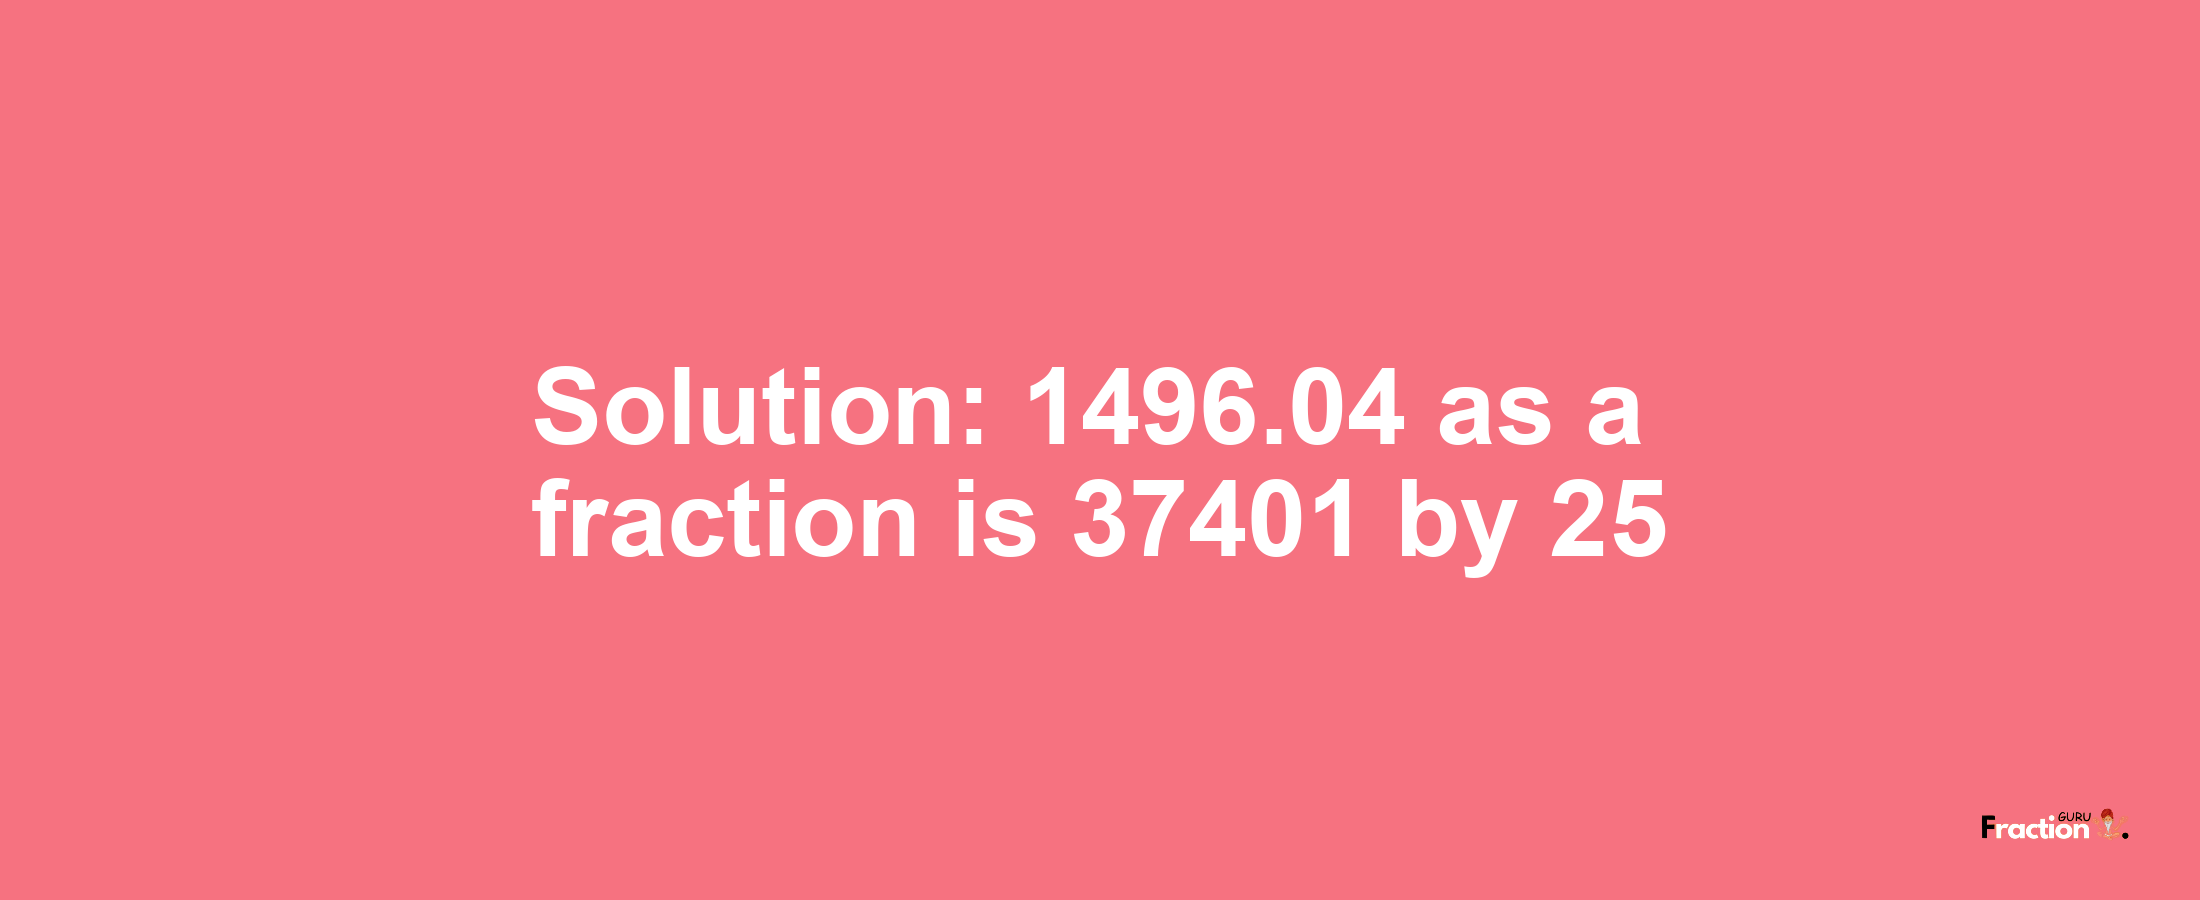 Solution:1496.04 as a fraction is 37401/25